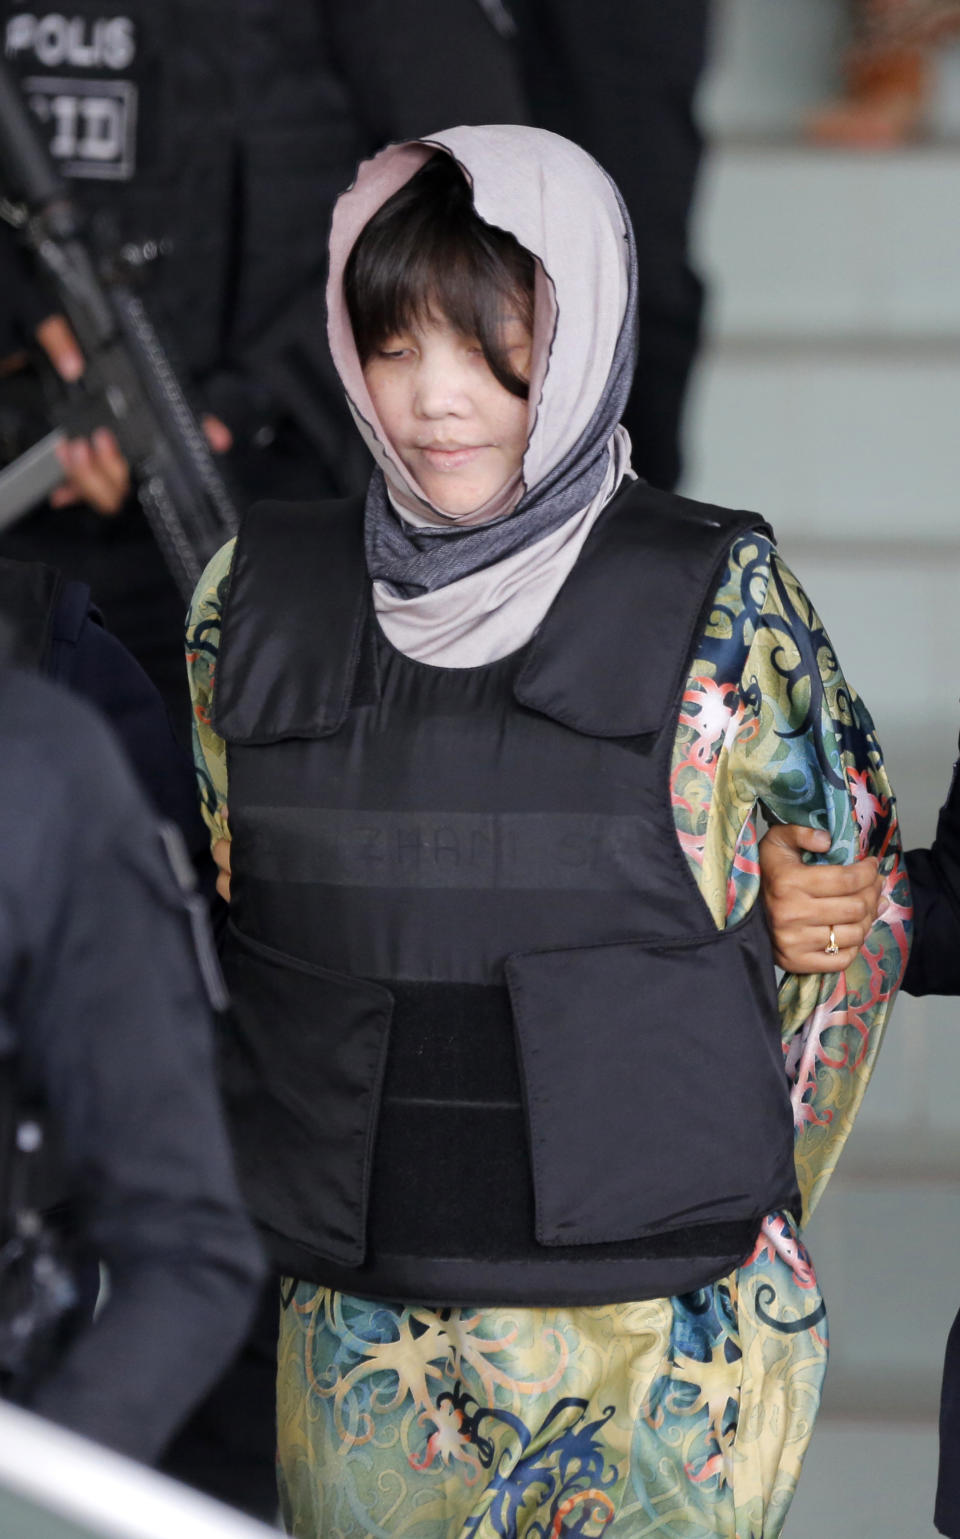 Vietnamese Doan Thi Huong is escorted by police as she leaves after court hearing at Shah Alam High Court in Shah Alam, Malaysia, Thursday, Aug. 16, 2018. Doan and Indonesian Siti Aisyah, who are on trial in the assassination of the North Korean leader's half brother have told the court they will testify in their defense. The women are accused of smearing VX nerve agent on Kim Jong Nam's face last year. They have said they thought it was a prank. A judge ruled Thursday the women should begin entering their defense. (AP Photo/Yam G-Jun)